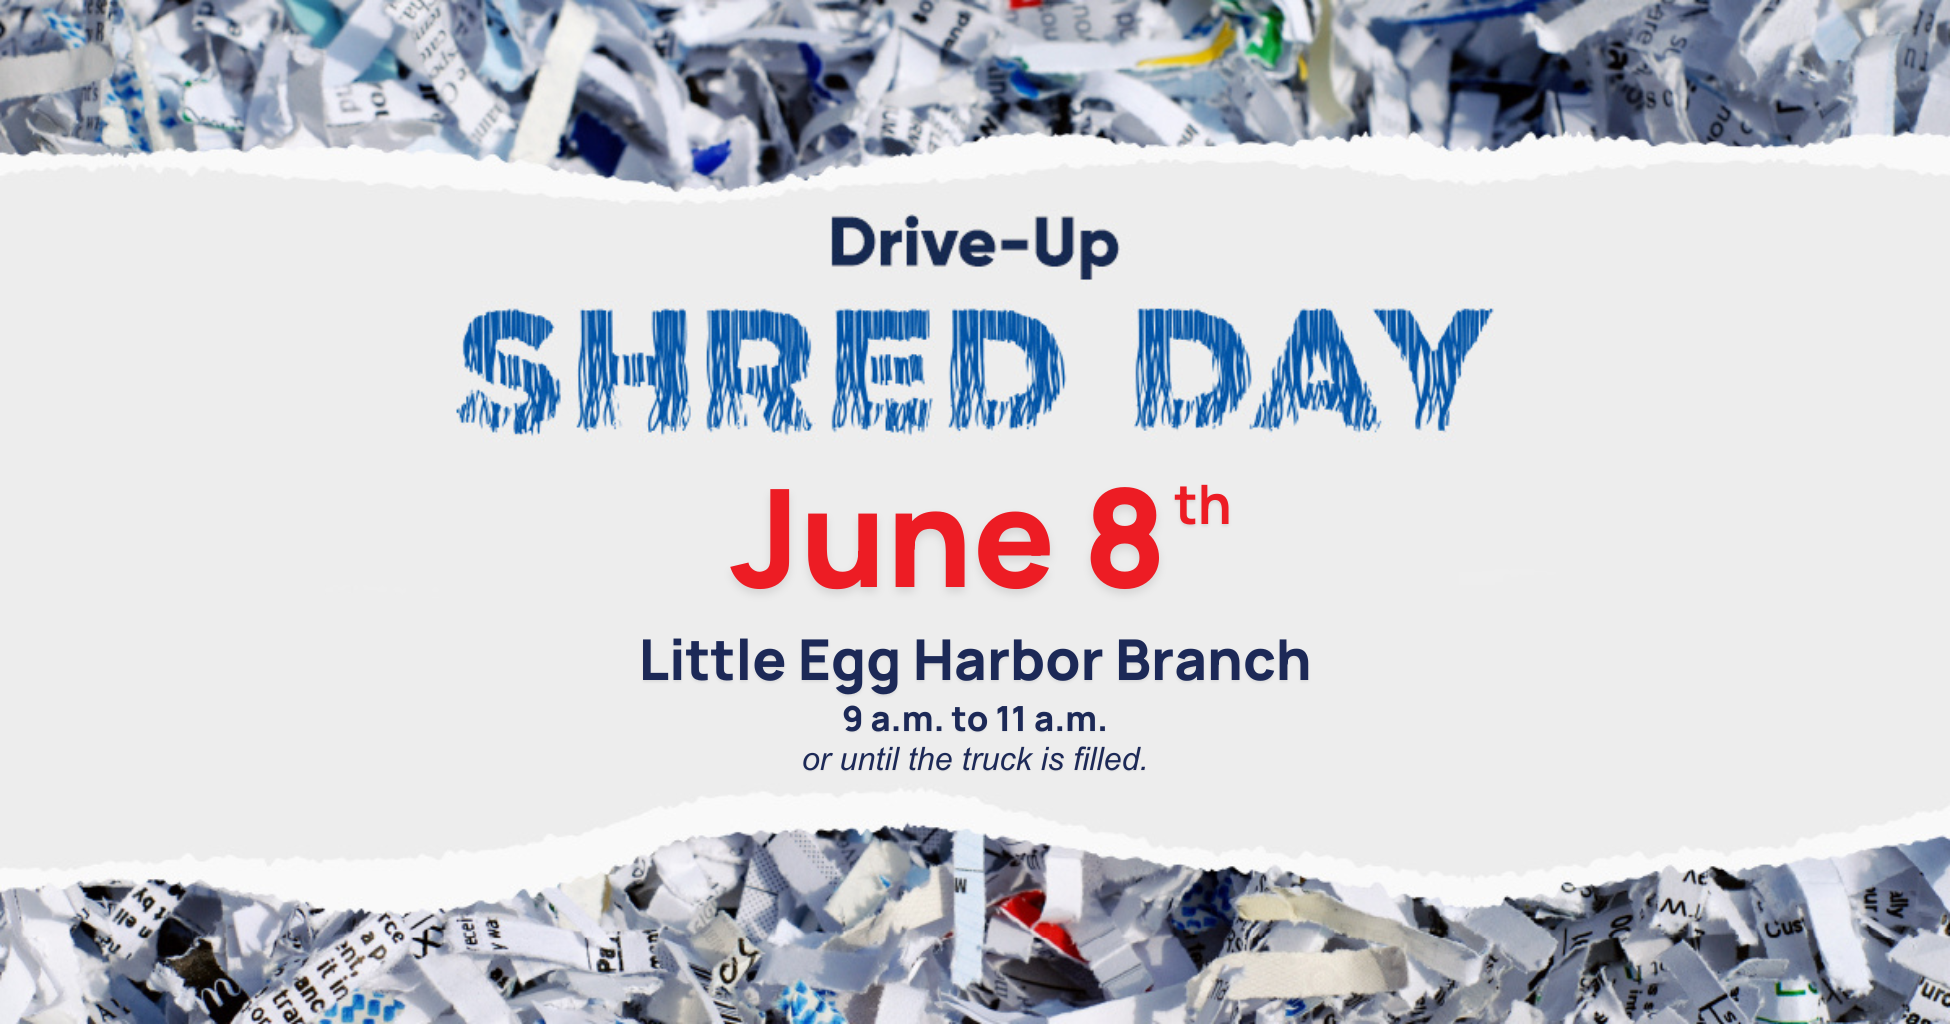 Shred Day at our Little Egg Harbor Branch